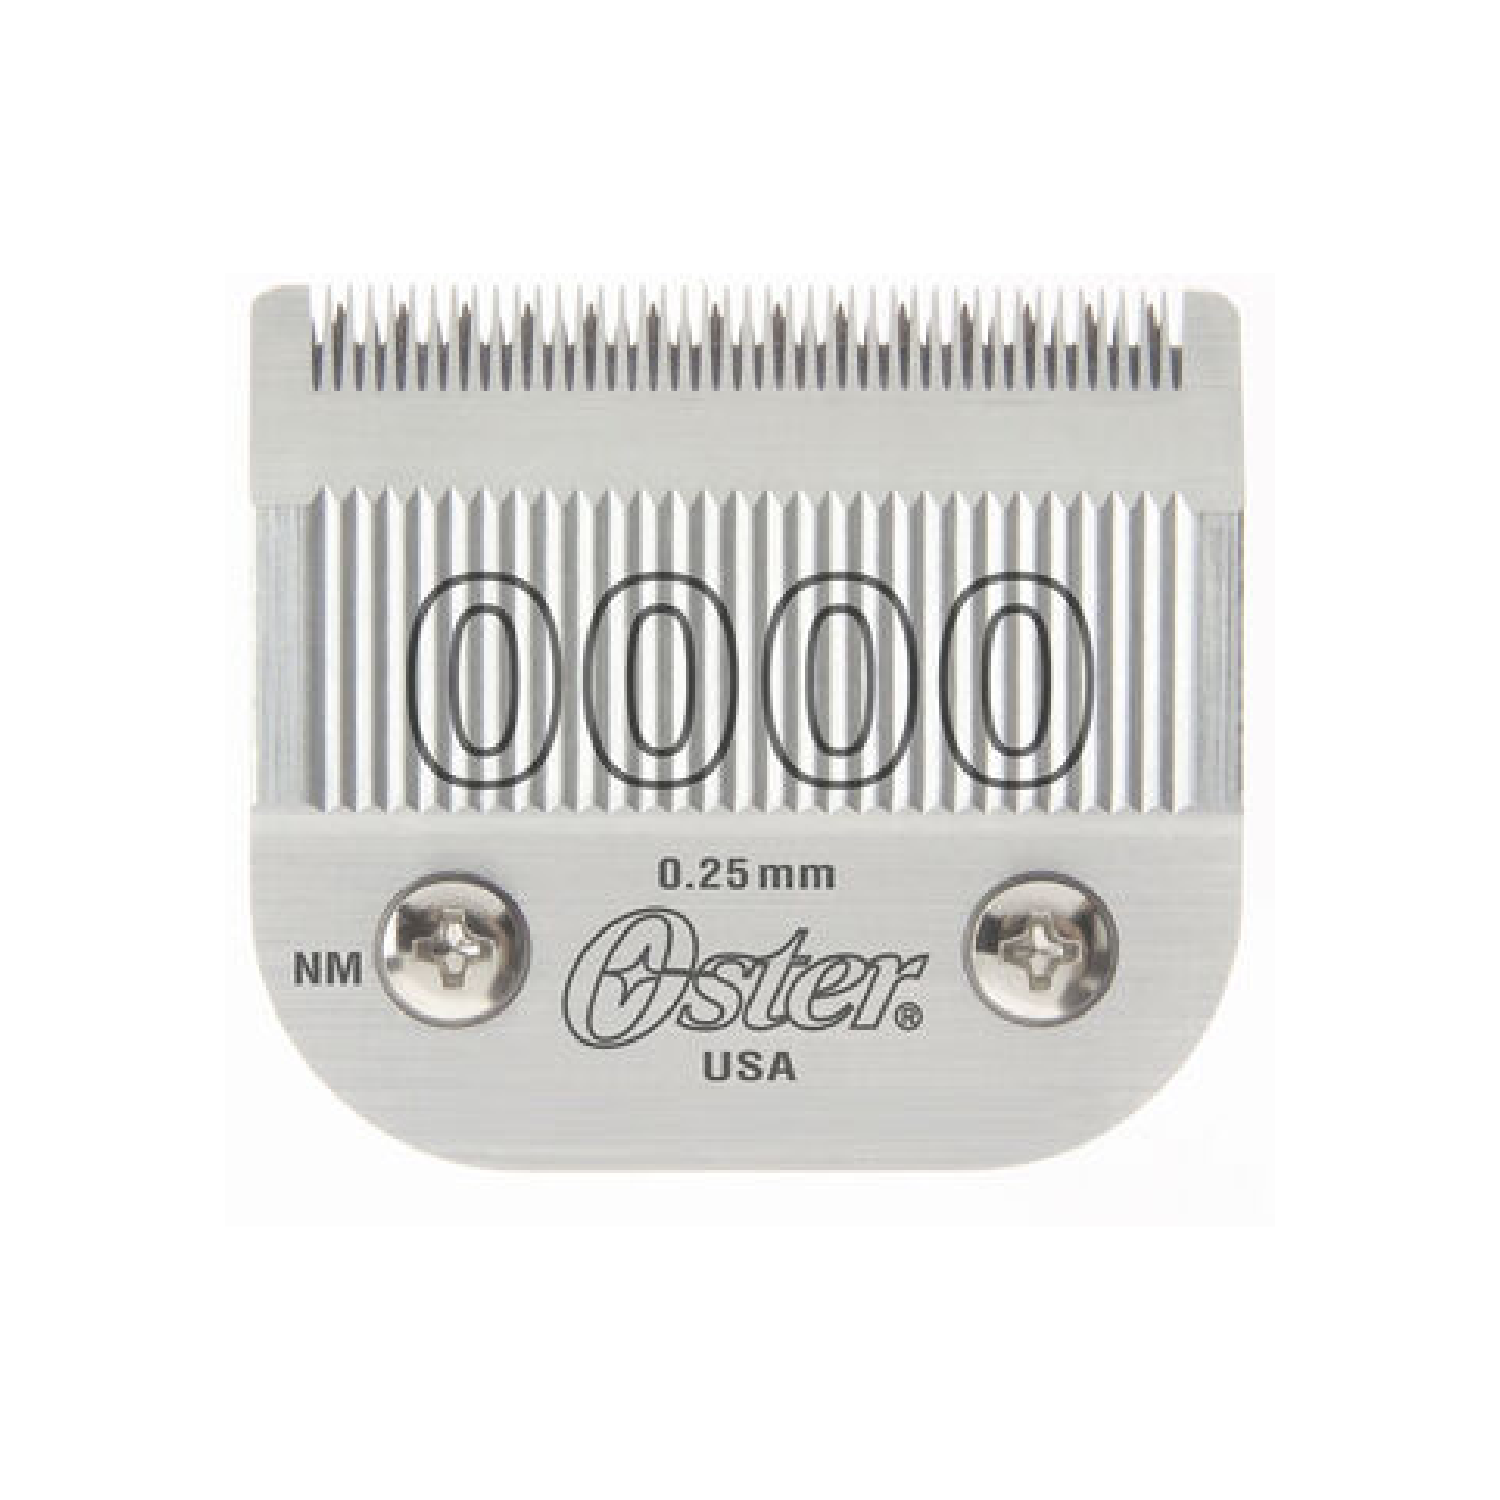 Oster Professional Detachable Blade Size 0000 #76918-016 - Fits Classic 76